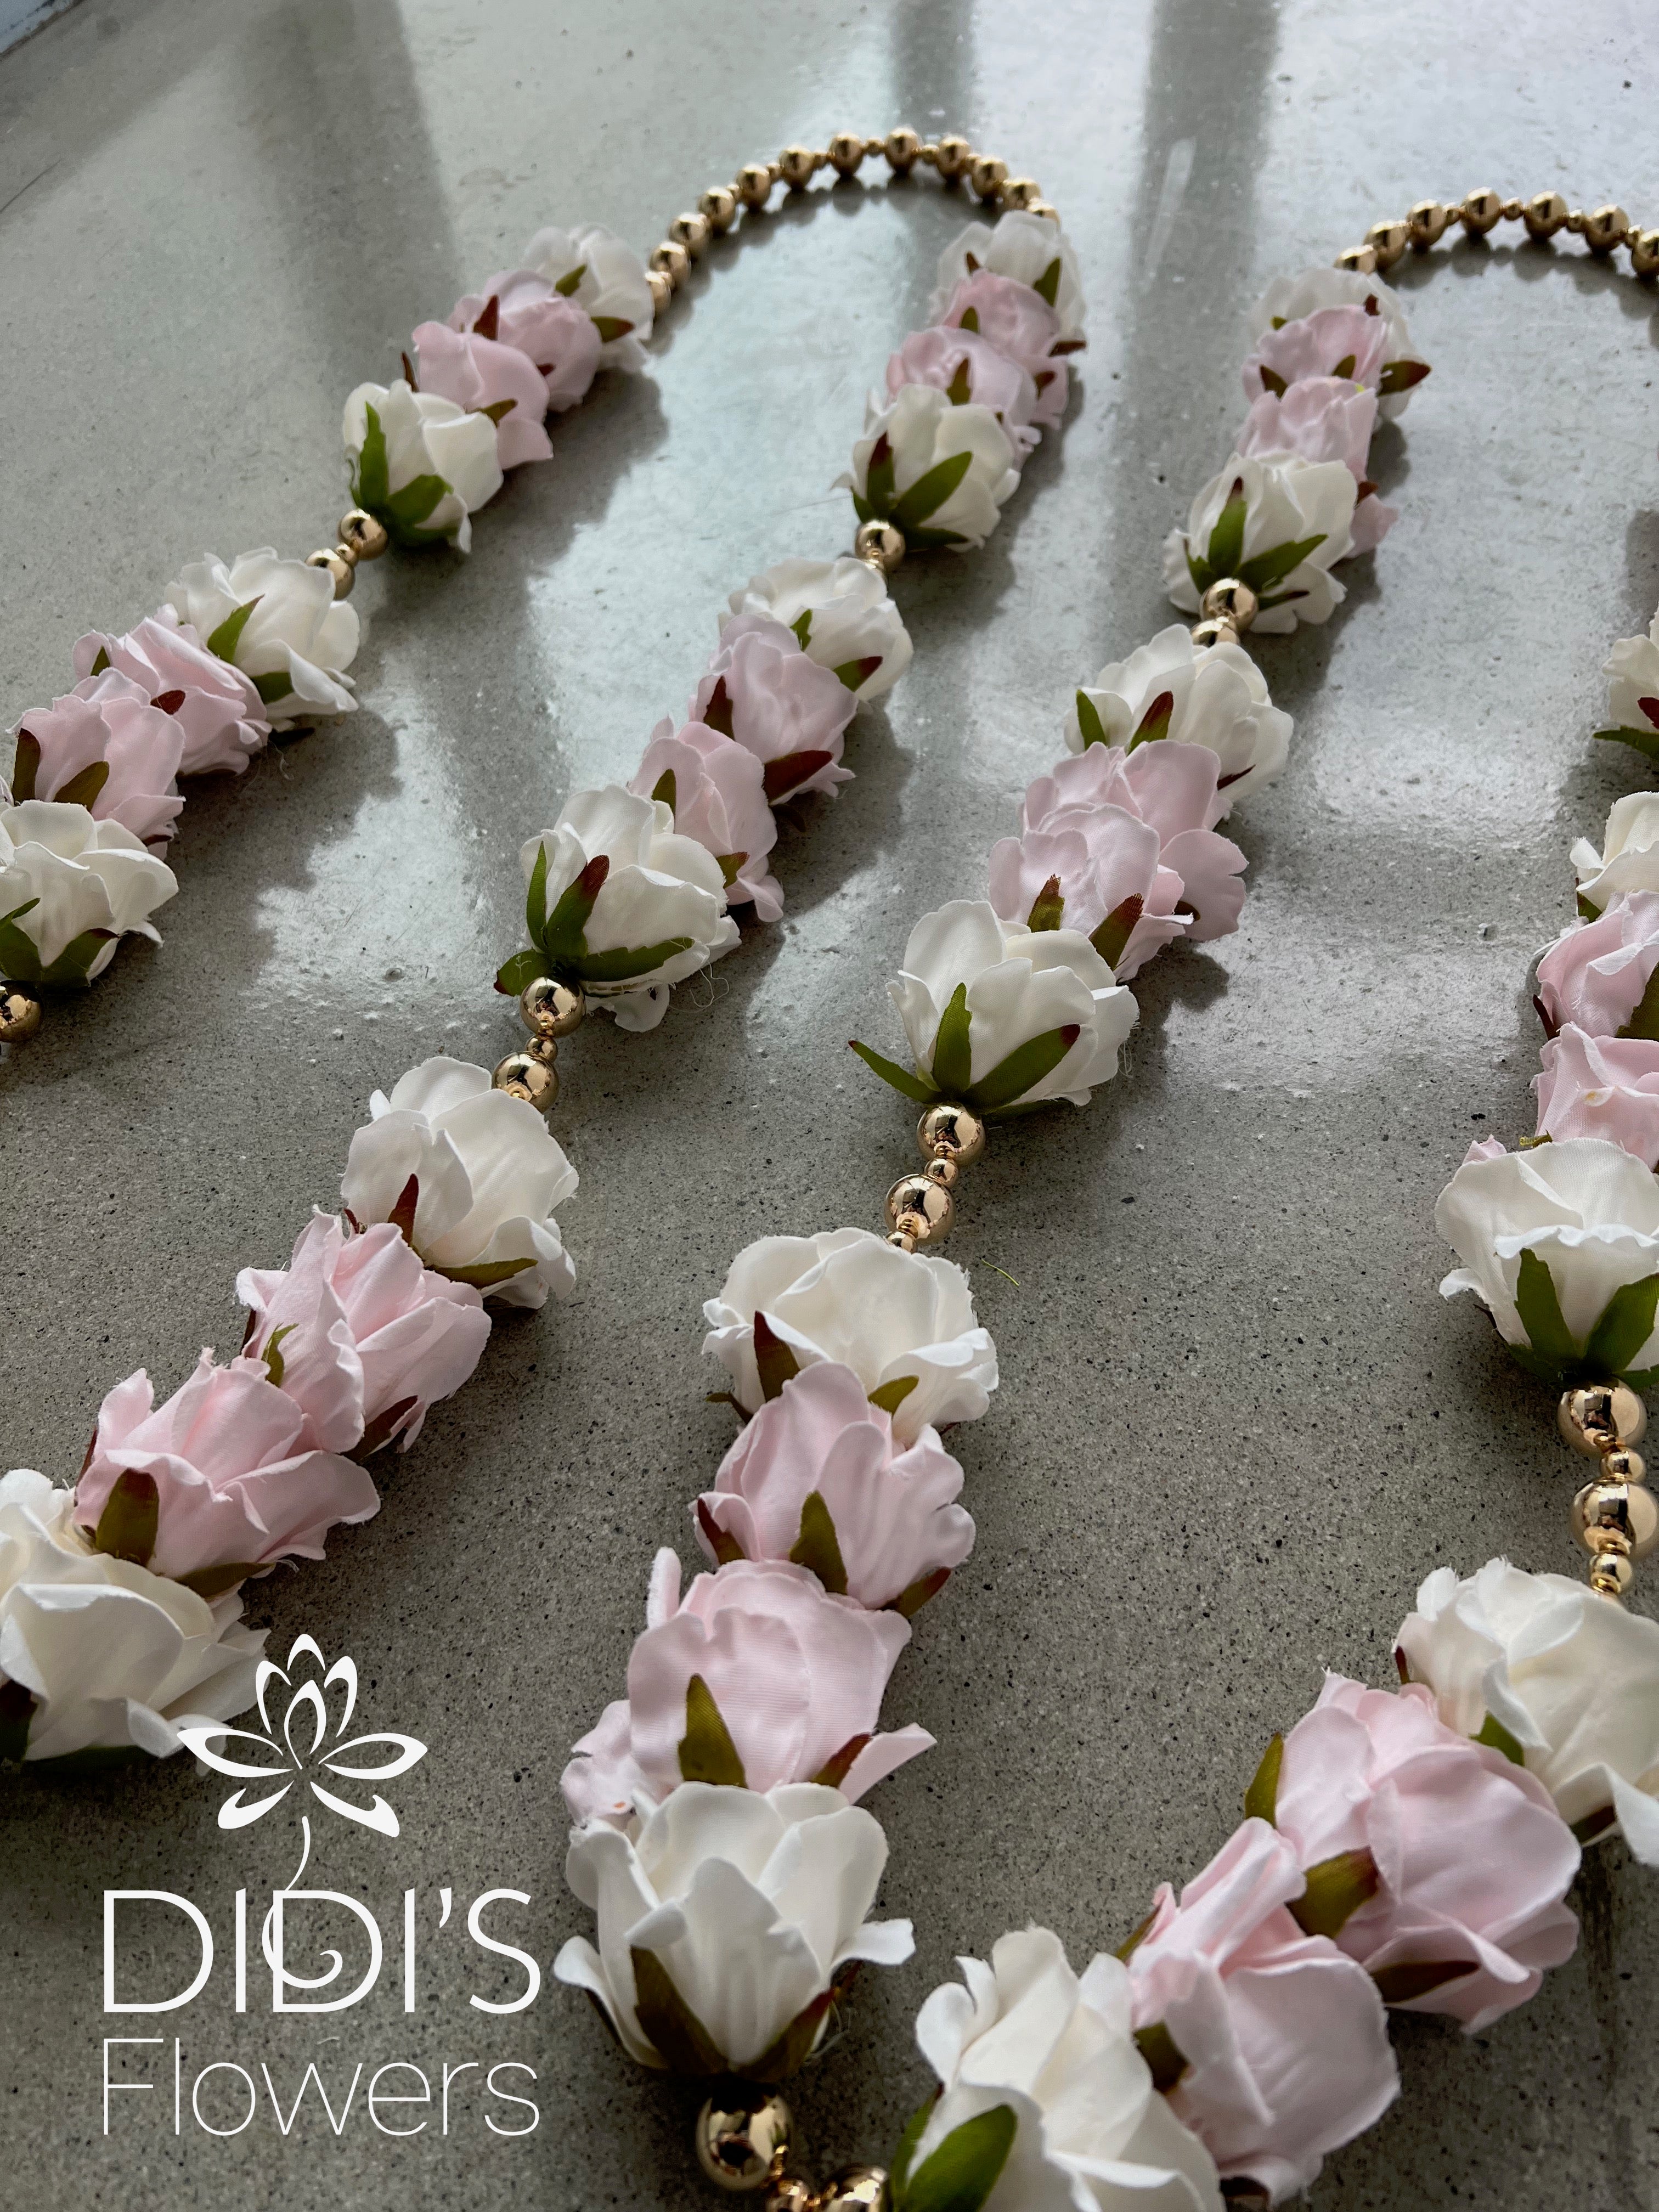 Mini Roses Garlands with beads